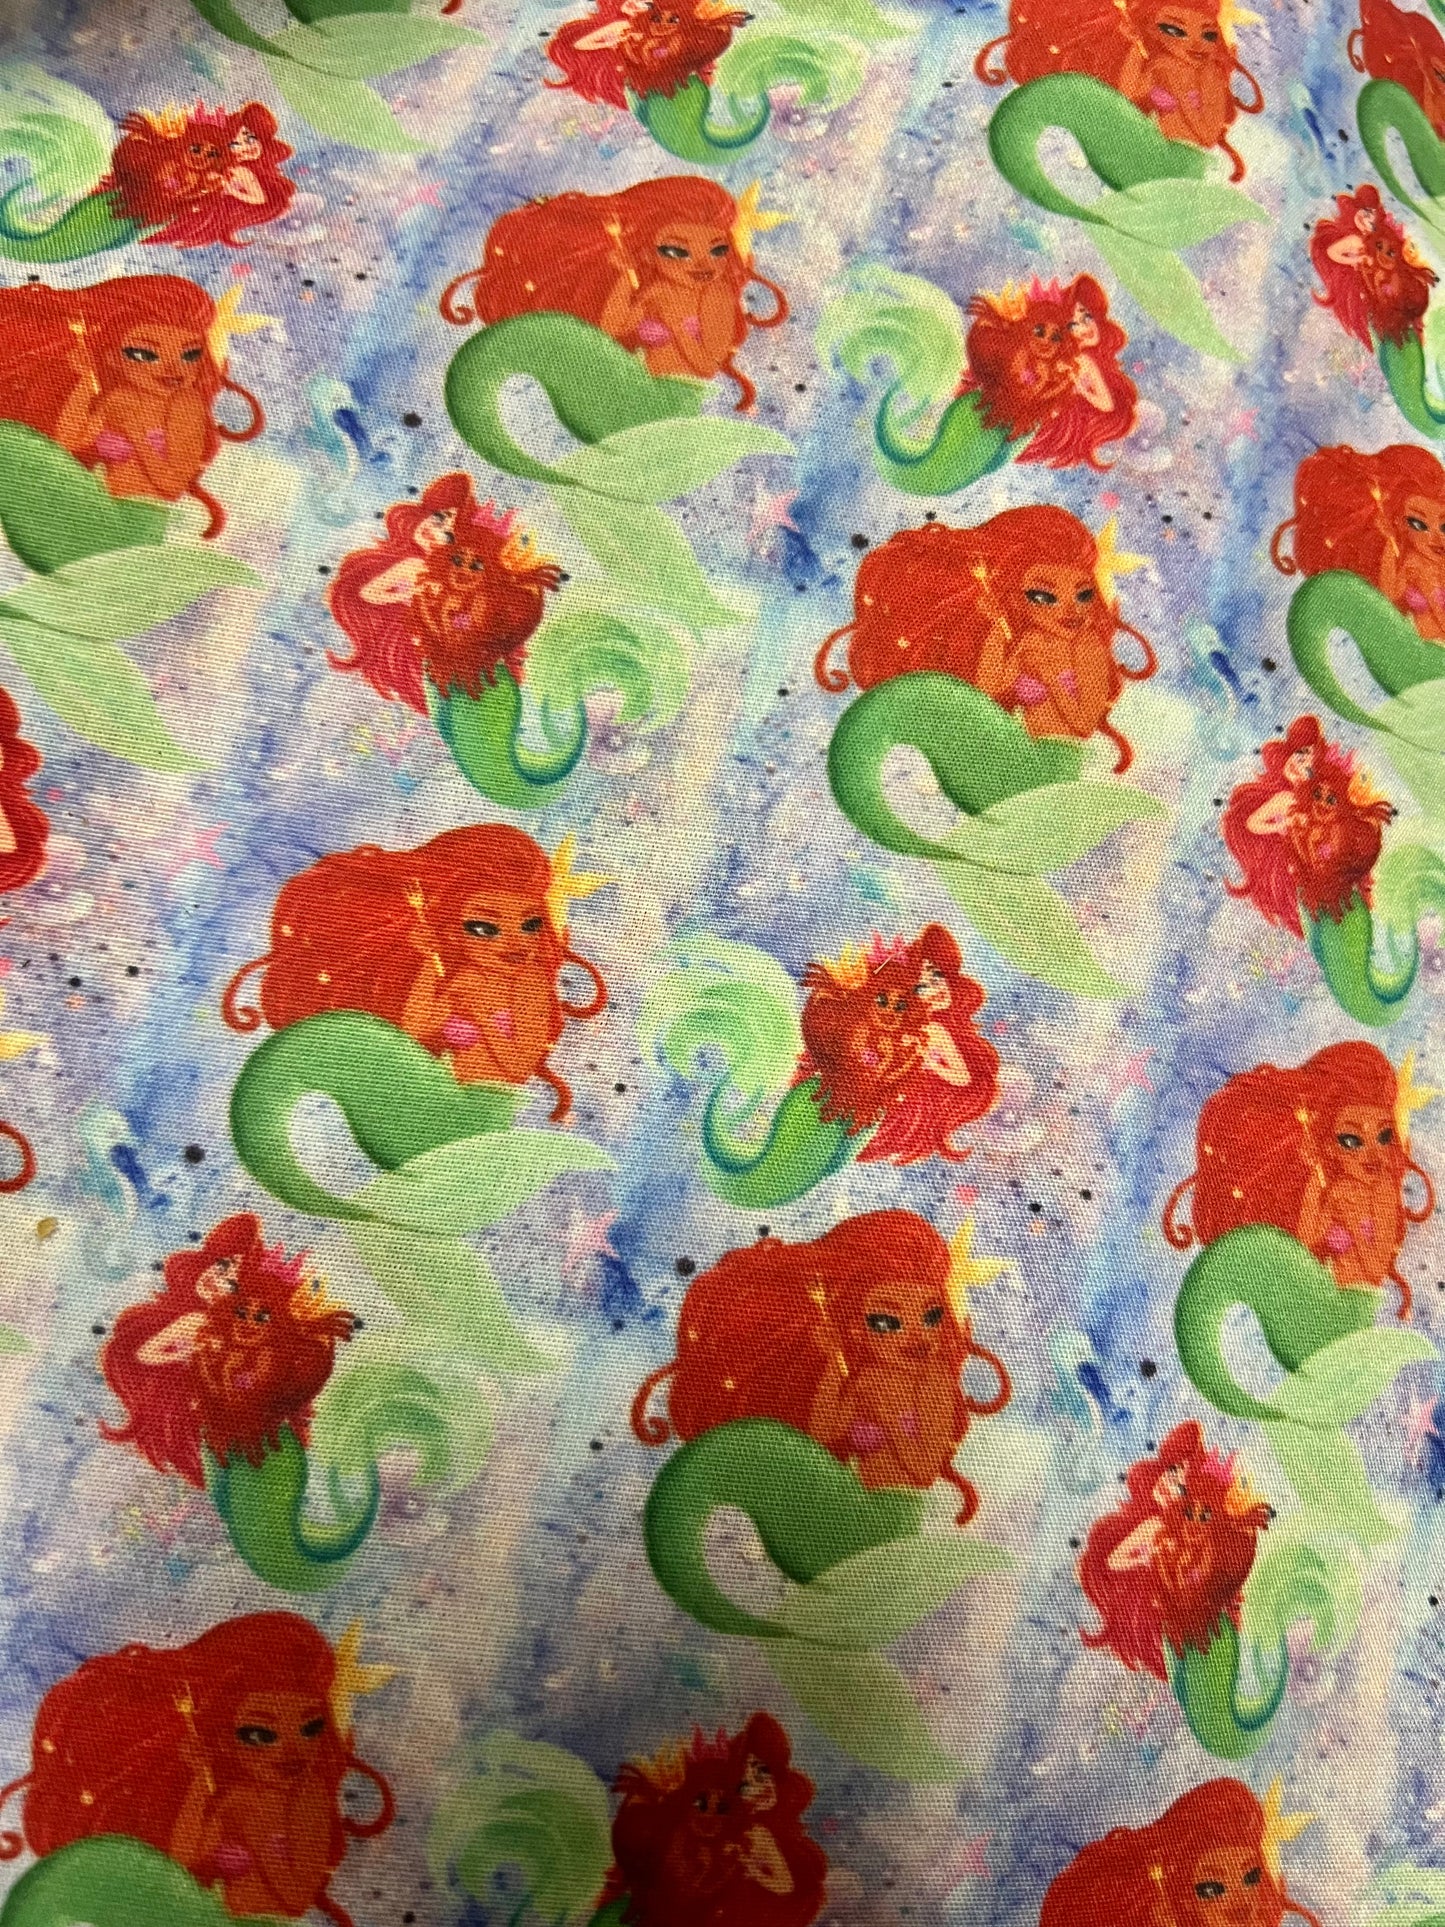 ARIEL LITTLE MERMAID - Polycotton Fabric from Japan